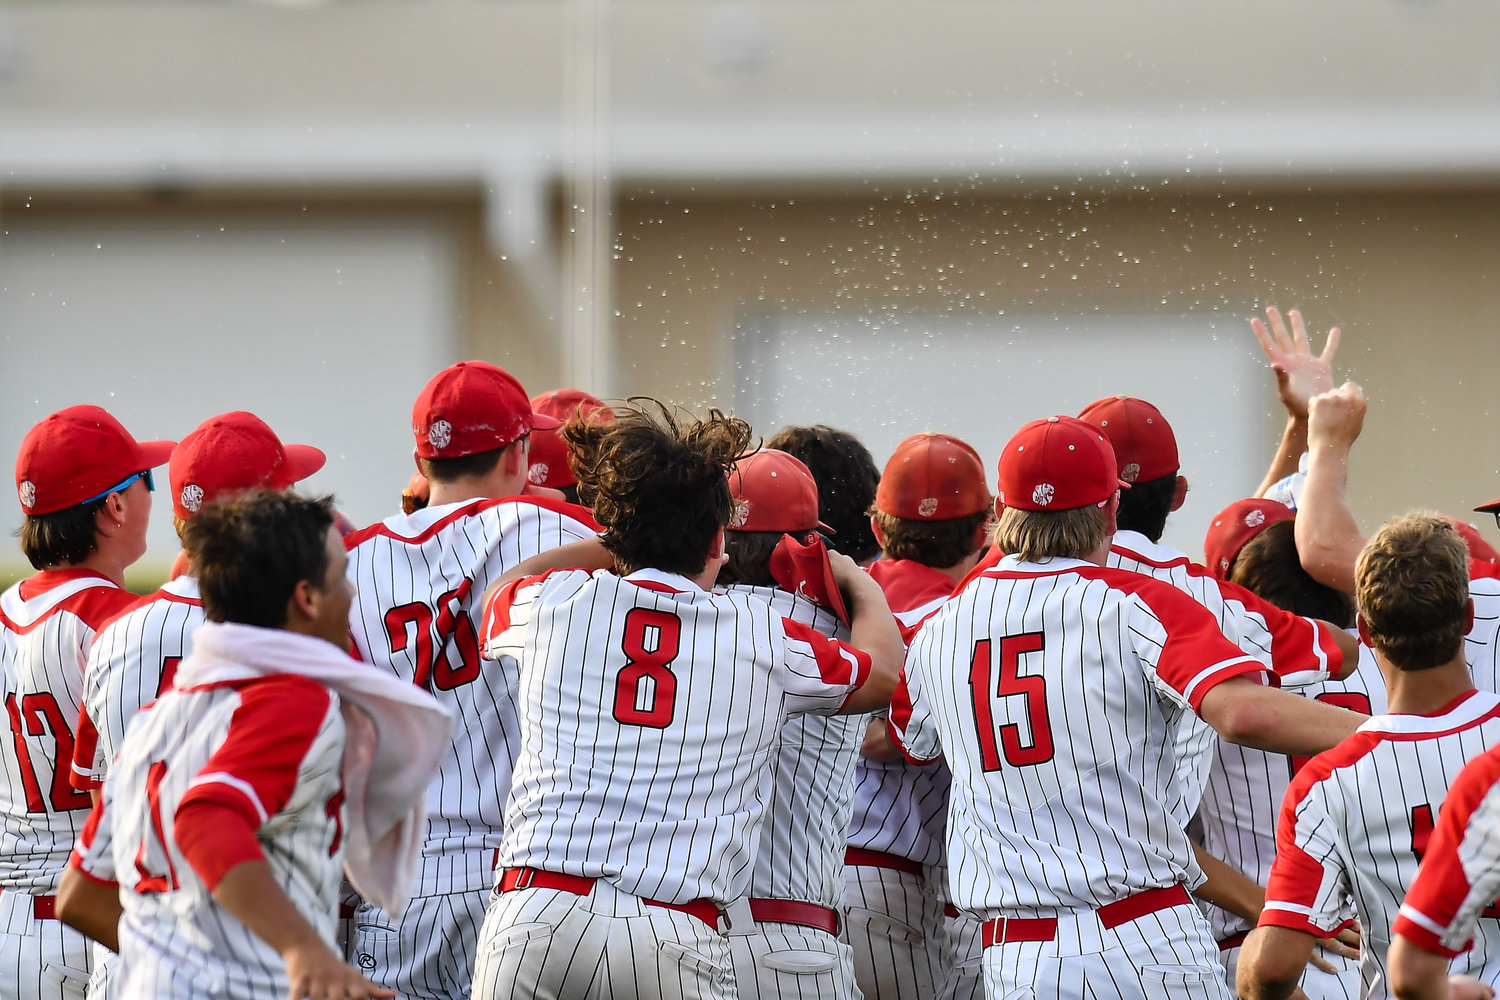 Katy Tigers celebrate the win after a home run hit by Katy's Sutton Hull (20) during the eight inning during a Region III-6A quarterfinals baseball game at Langham Creek High School, Saturday, May 21, 2022.